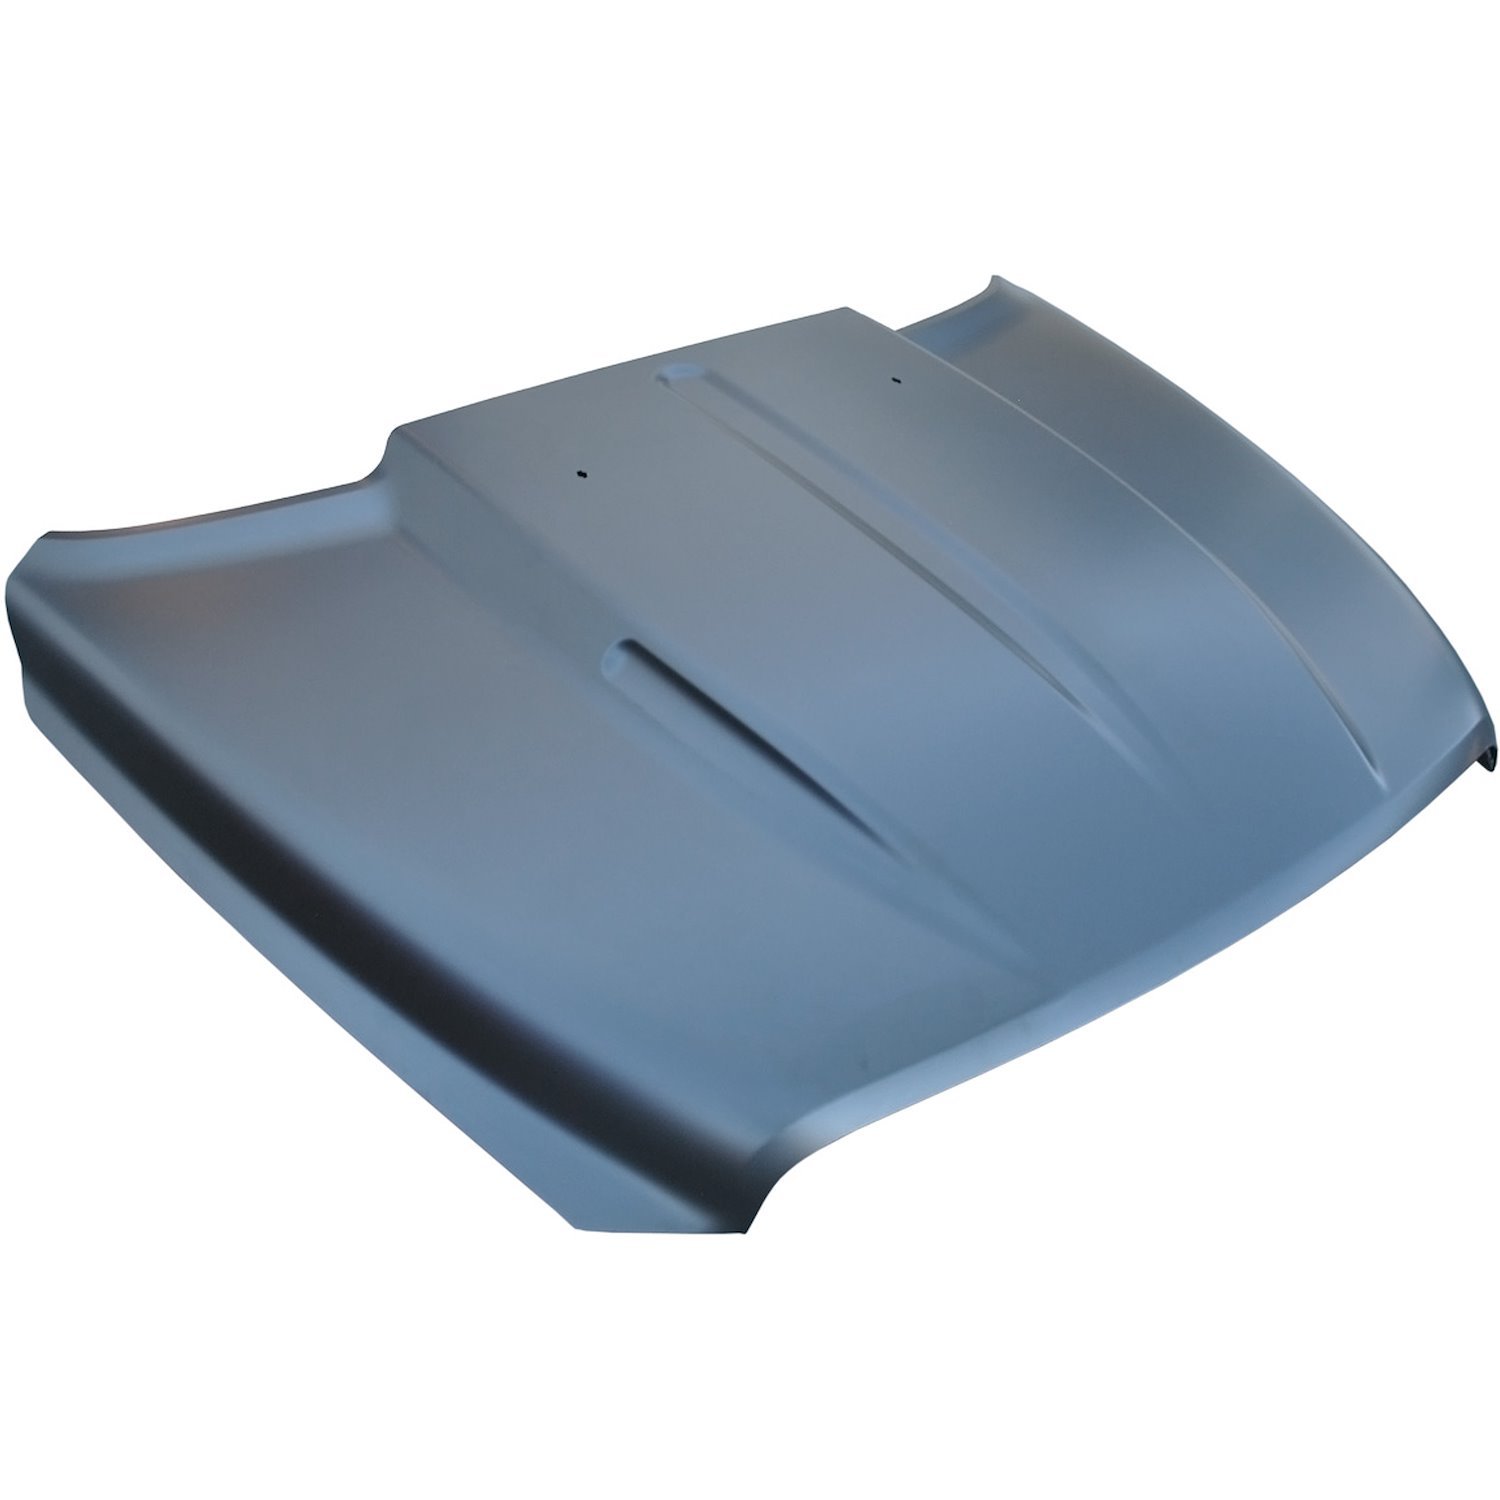 1584-035 Cowl Induction Hood for 2009-2018 Ram 1500 Pickup Trucks [2 in.]